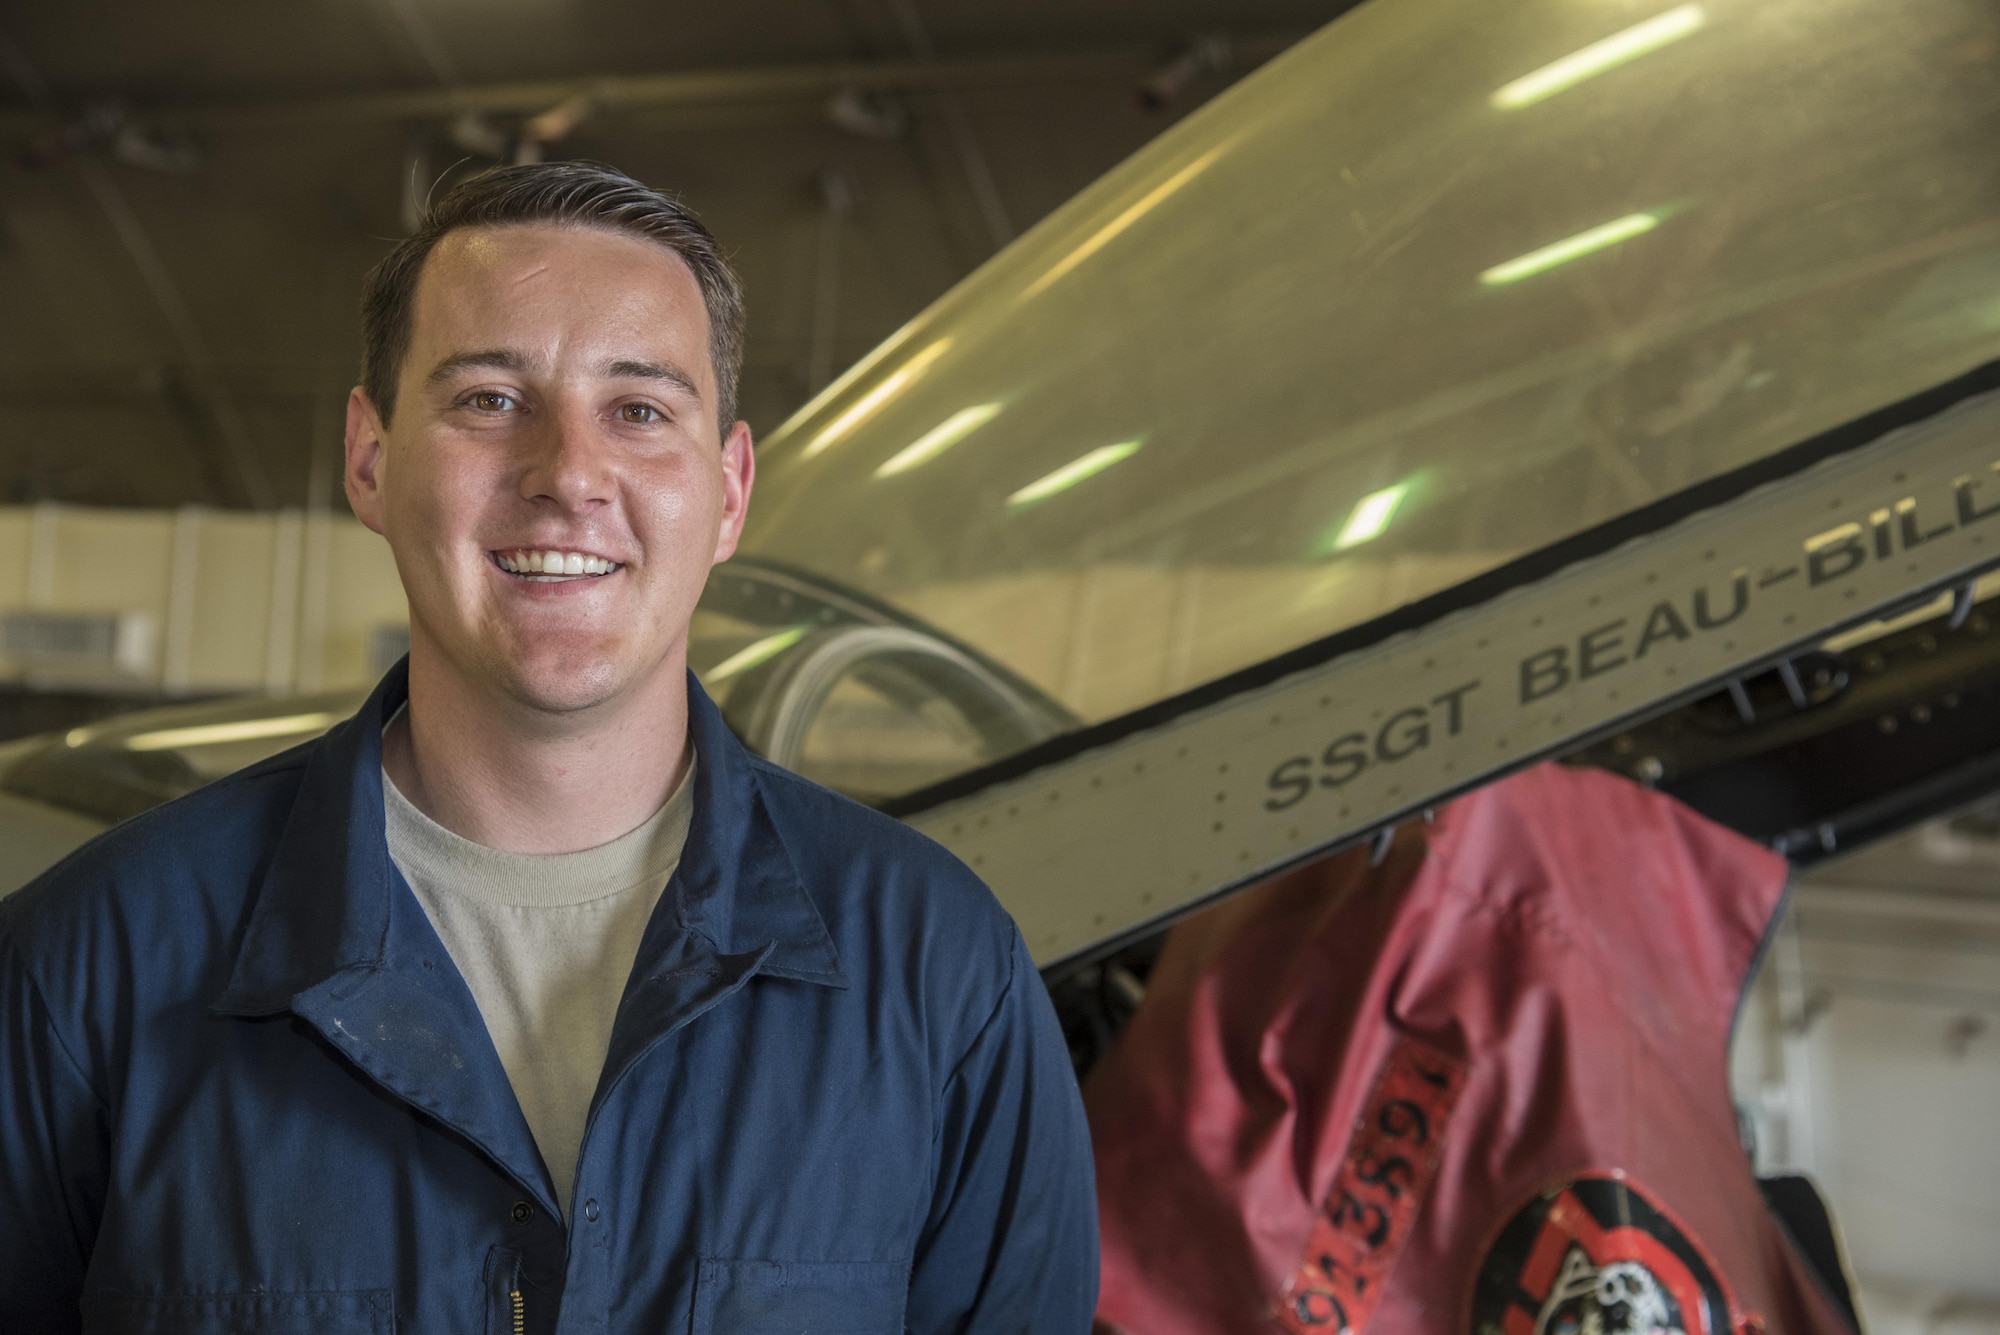 U.S. Air Force Staff Sgt. Beau Blackburn, a dedicated crew chief with the 35th Aircraft Maintenance Squadron, poses for a photograph next to an F-16 Fighting Falcon canopy at Misawa Air Base, Japan, June 16, 2016. When a crew chief is assigned to an aircraft, their name is symbolically posted to the side of the bubble canopy. This tradition signifies the responsibility each crew chief has to keep their aircraft in perfect working order, ensuring its reliability. Blackburn hails from Iona, Idaho. (U.S. Air Force photo by Airman 1st Class Jordyn Fetter)